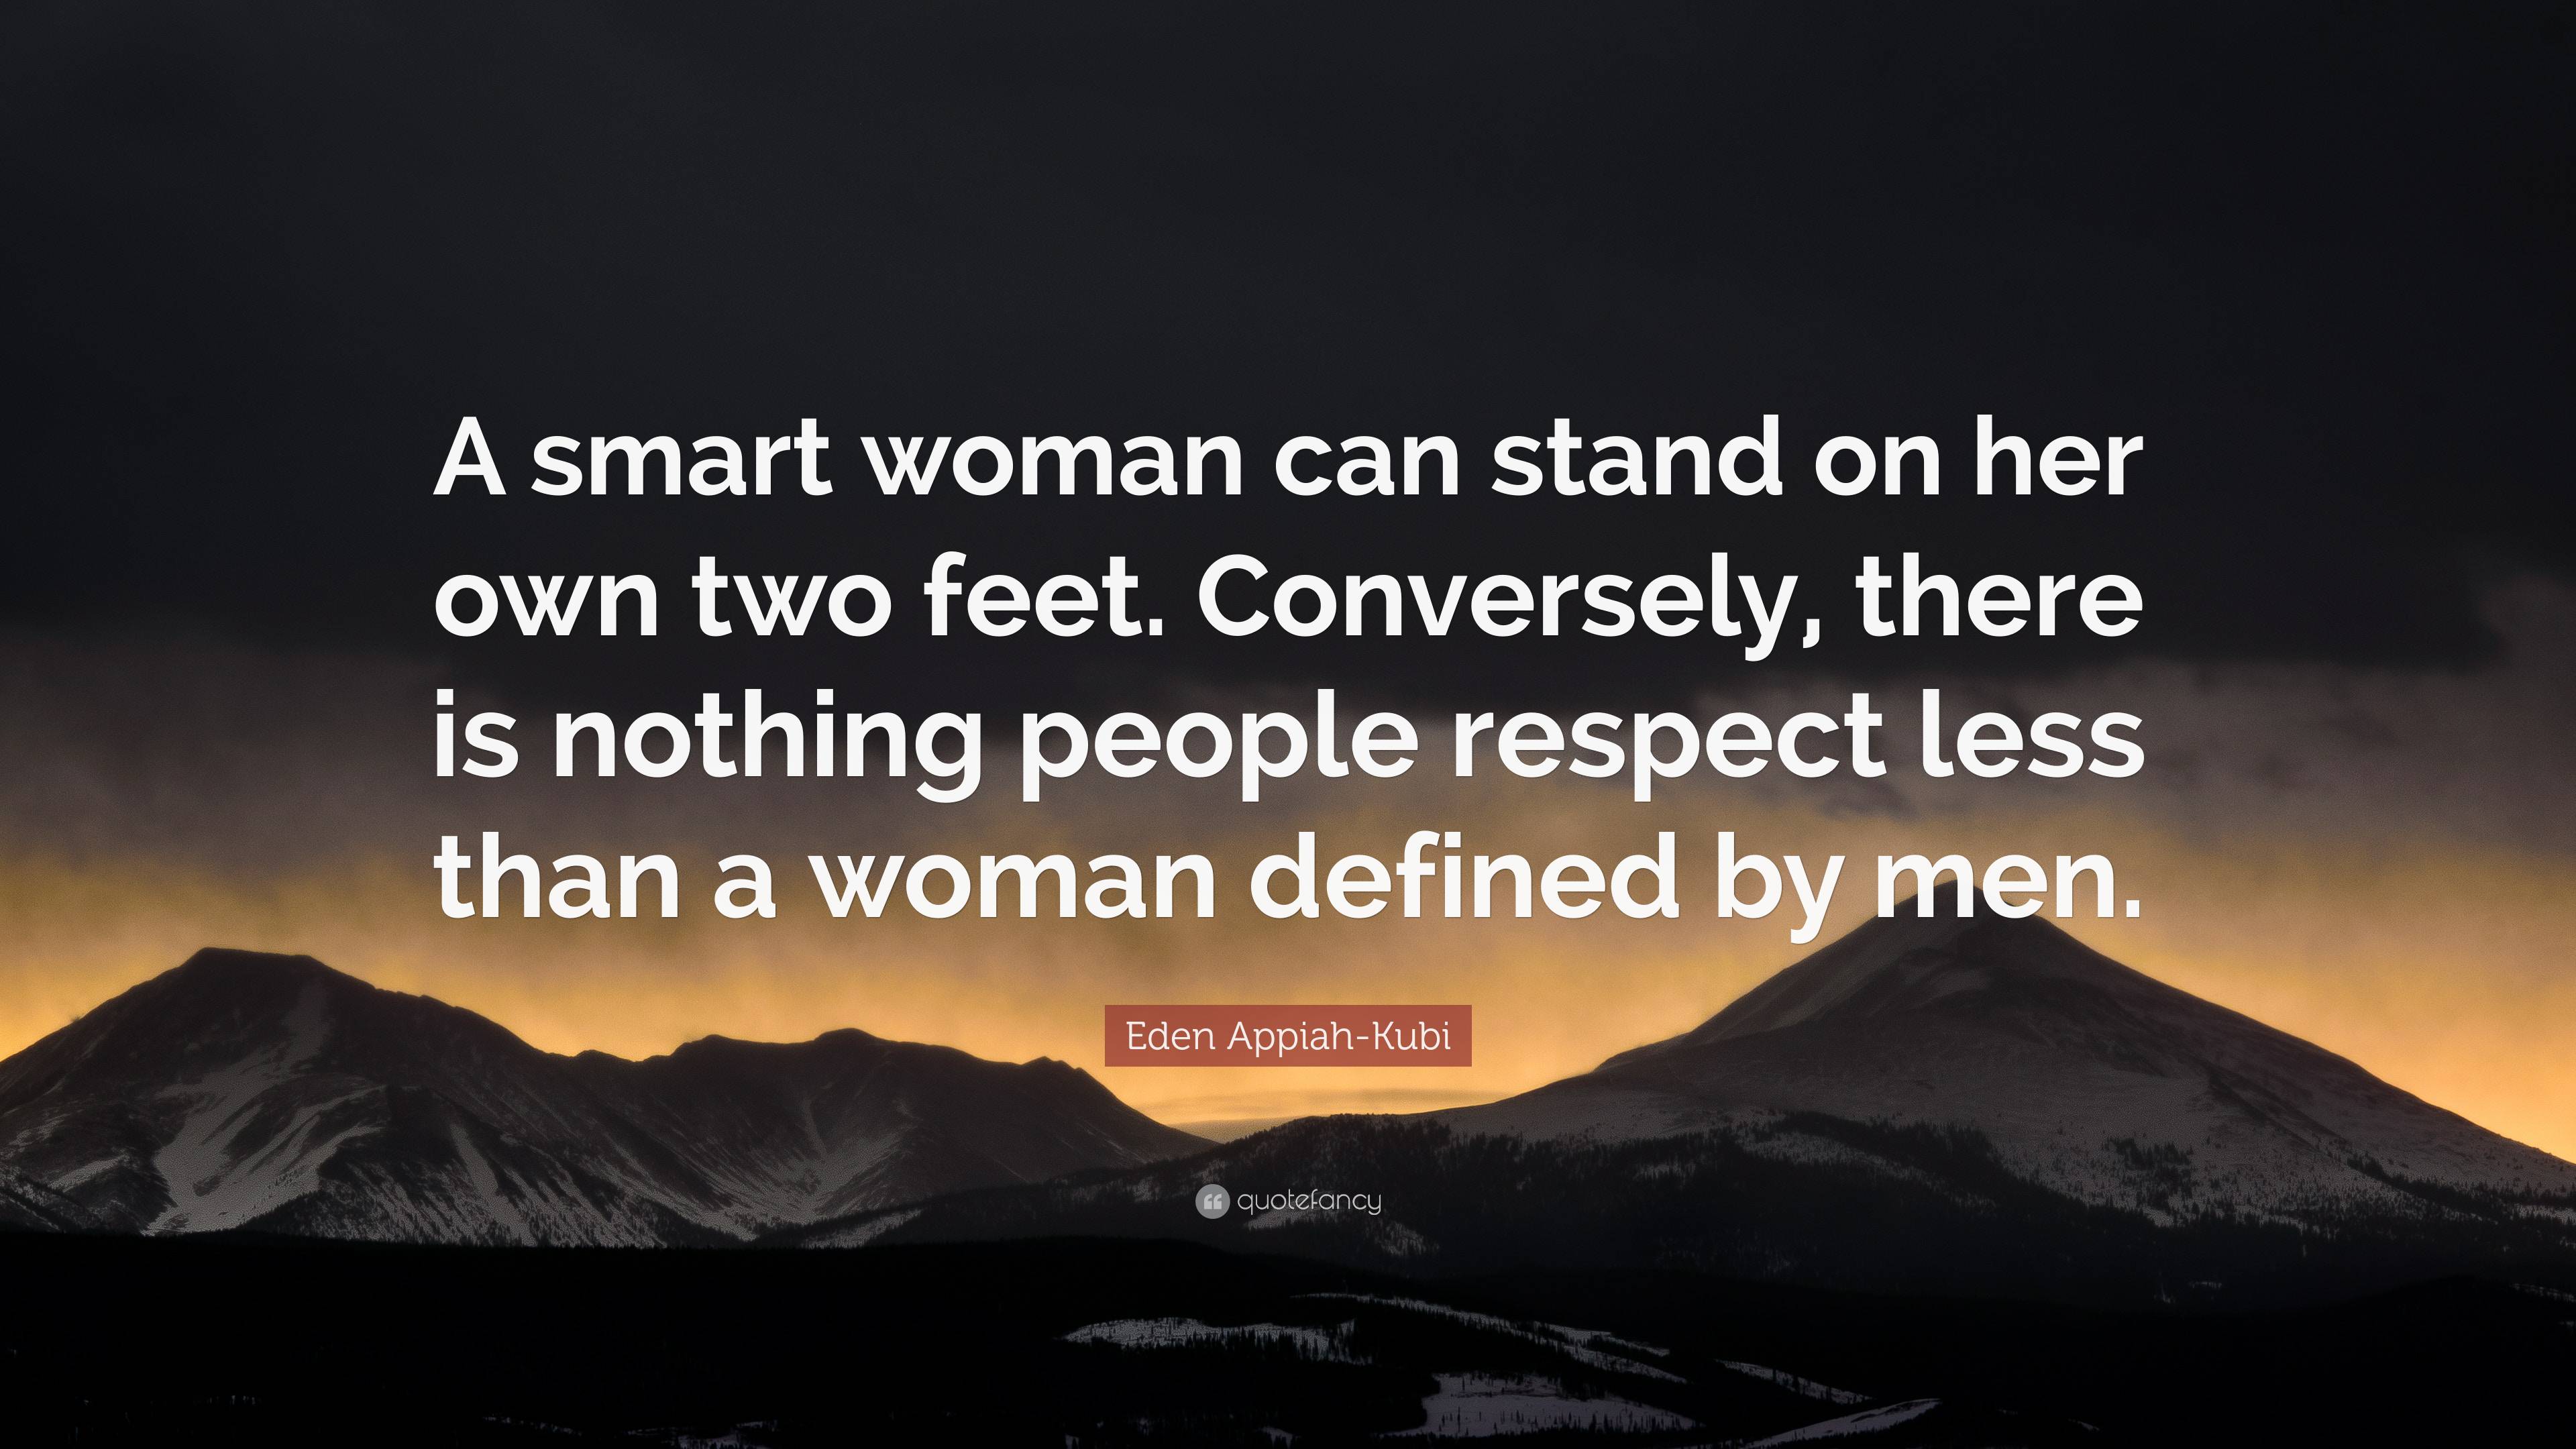 Eden Appiah-Kubi Quote: “A smart woman can stand on her own two feet.  Conversely, there is nothing people respect less than a woman defined by  me”